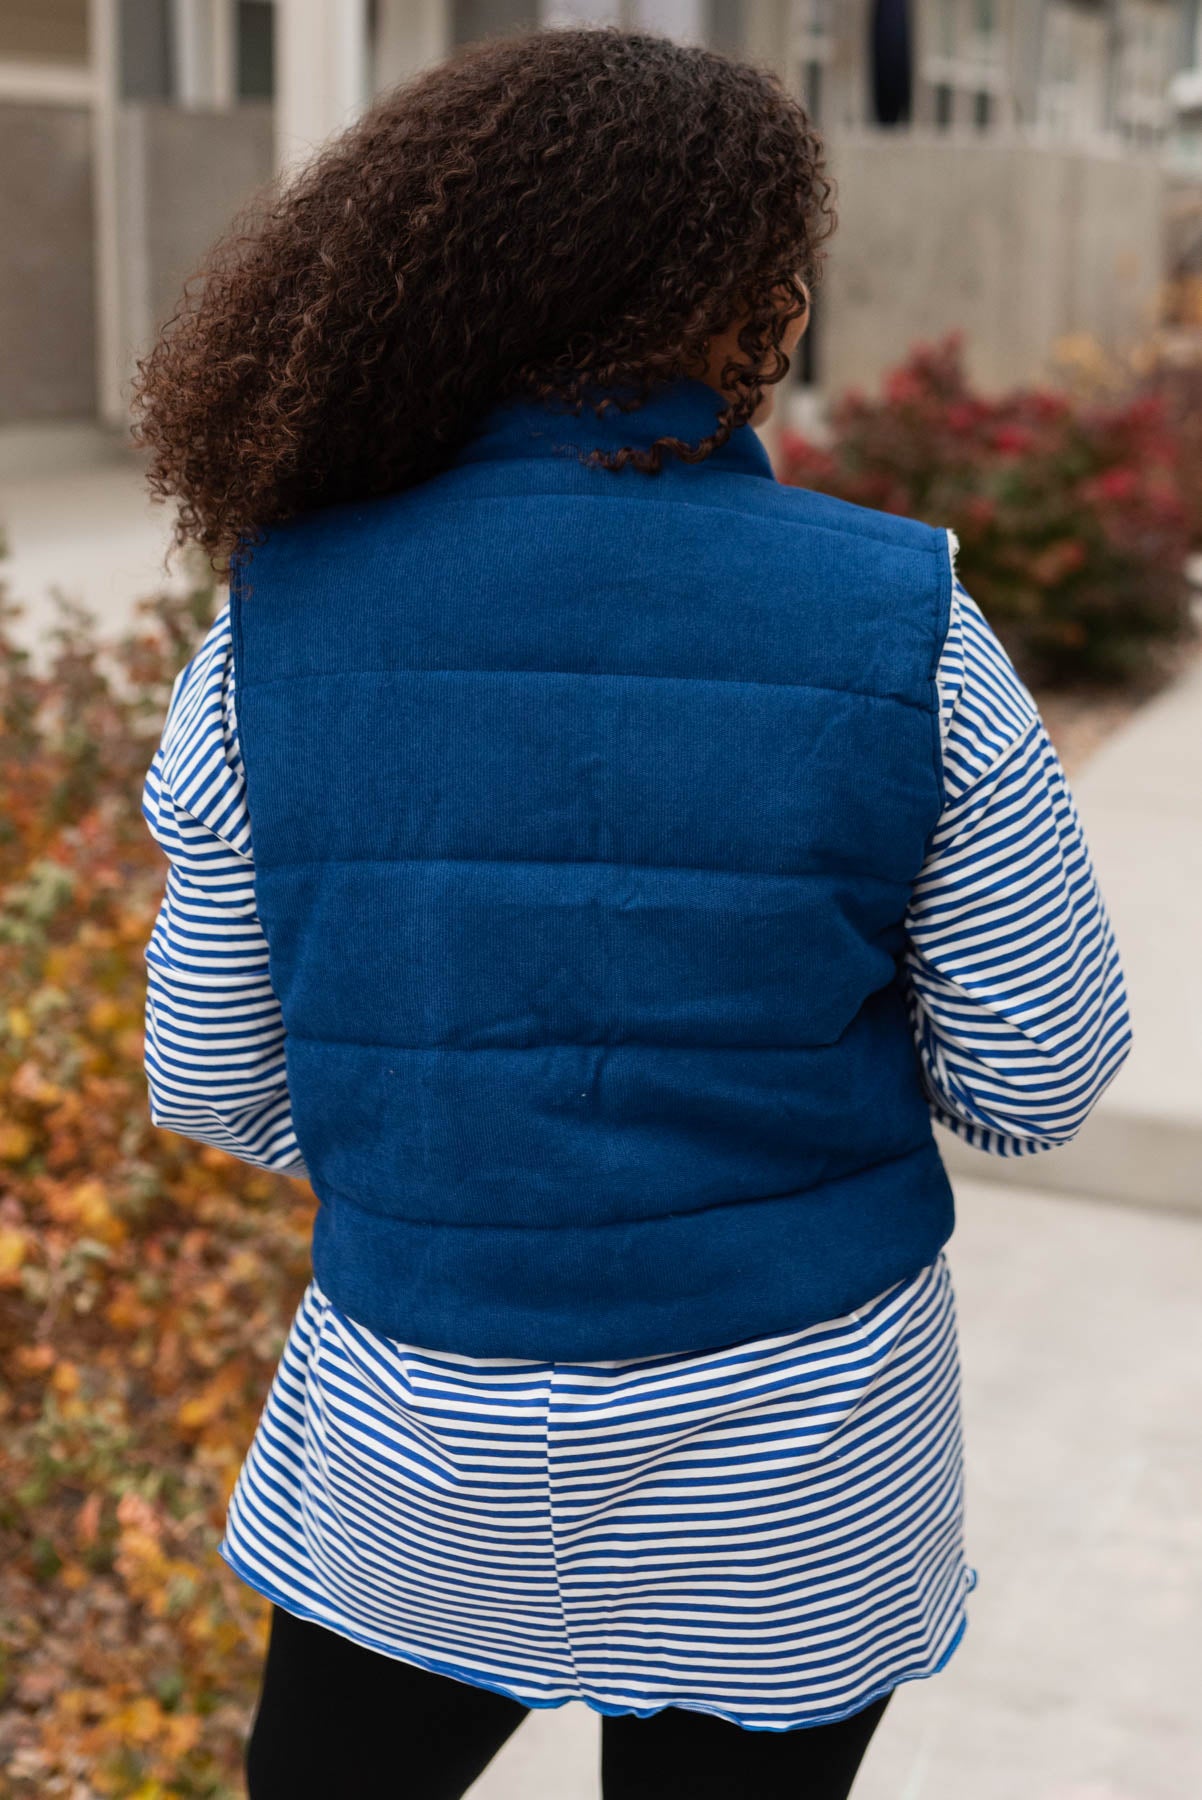 Back view of the blue corduroy vest